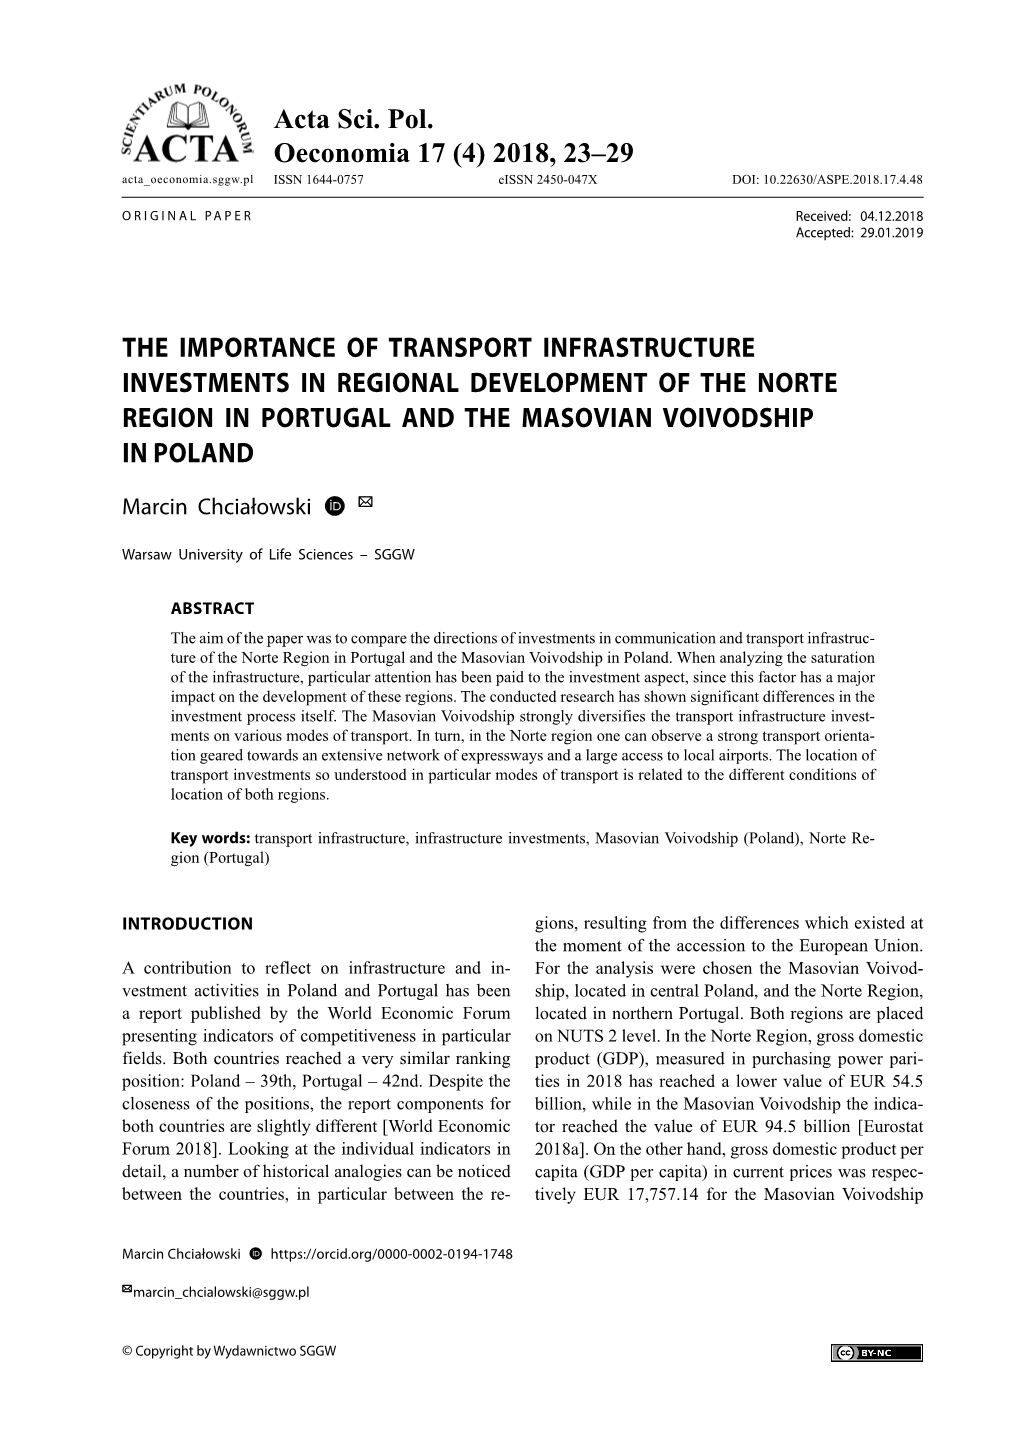 The Importance of Transport Infrastructure Investments in Regional Development of the Norte Region in Portugal and the Masovian Voivodship in Poland